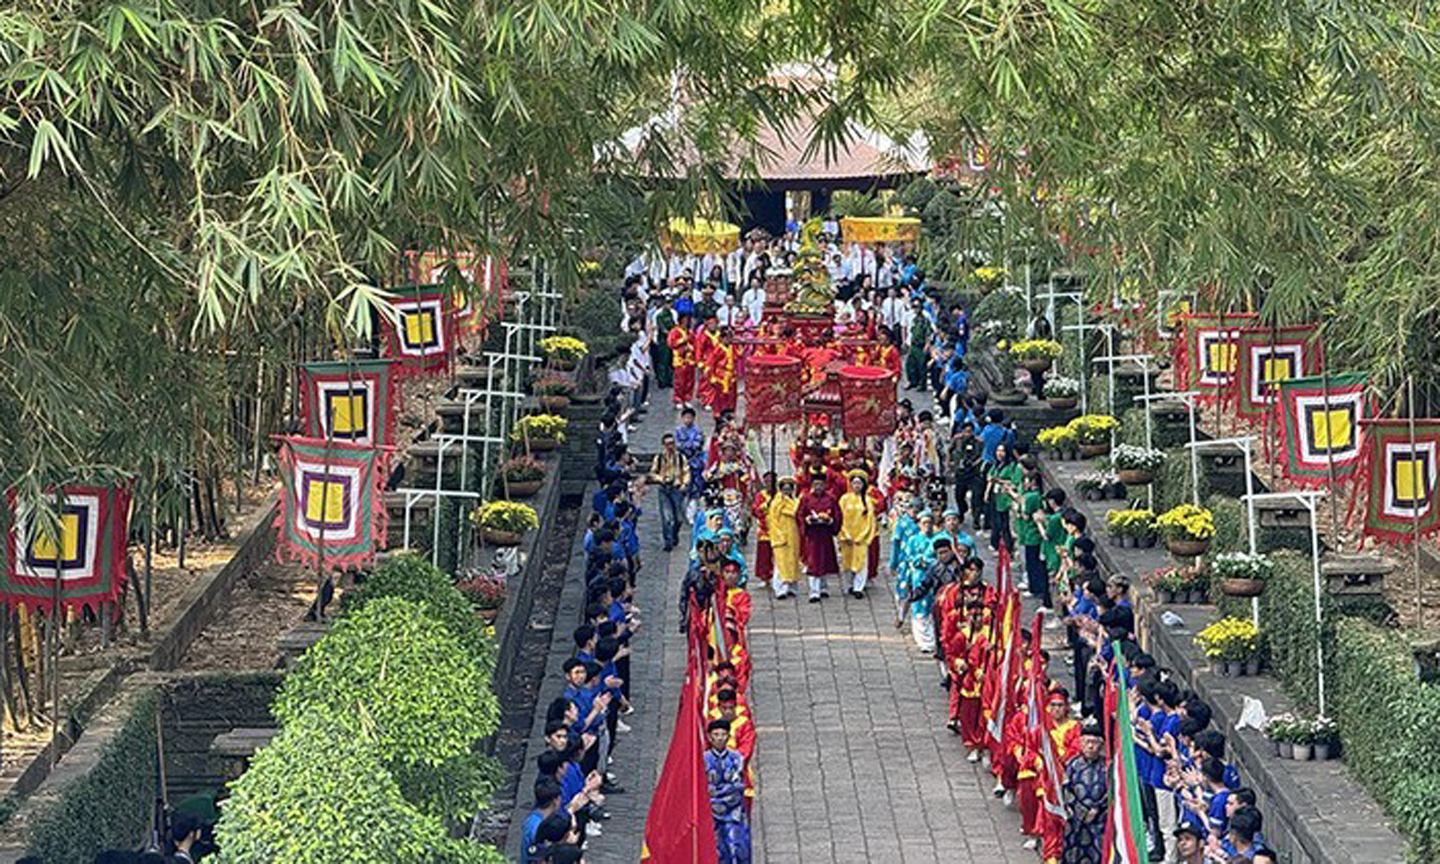 The ceremony to commemorate Hung Kings in Ho Chi Minh City.